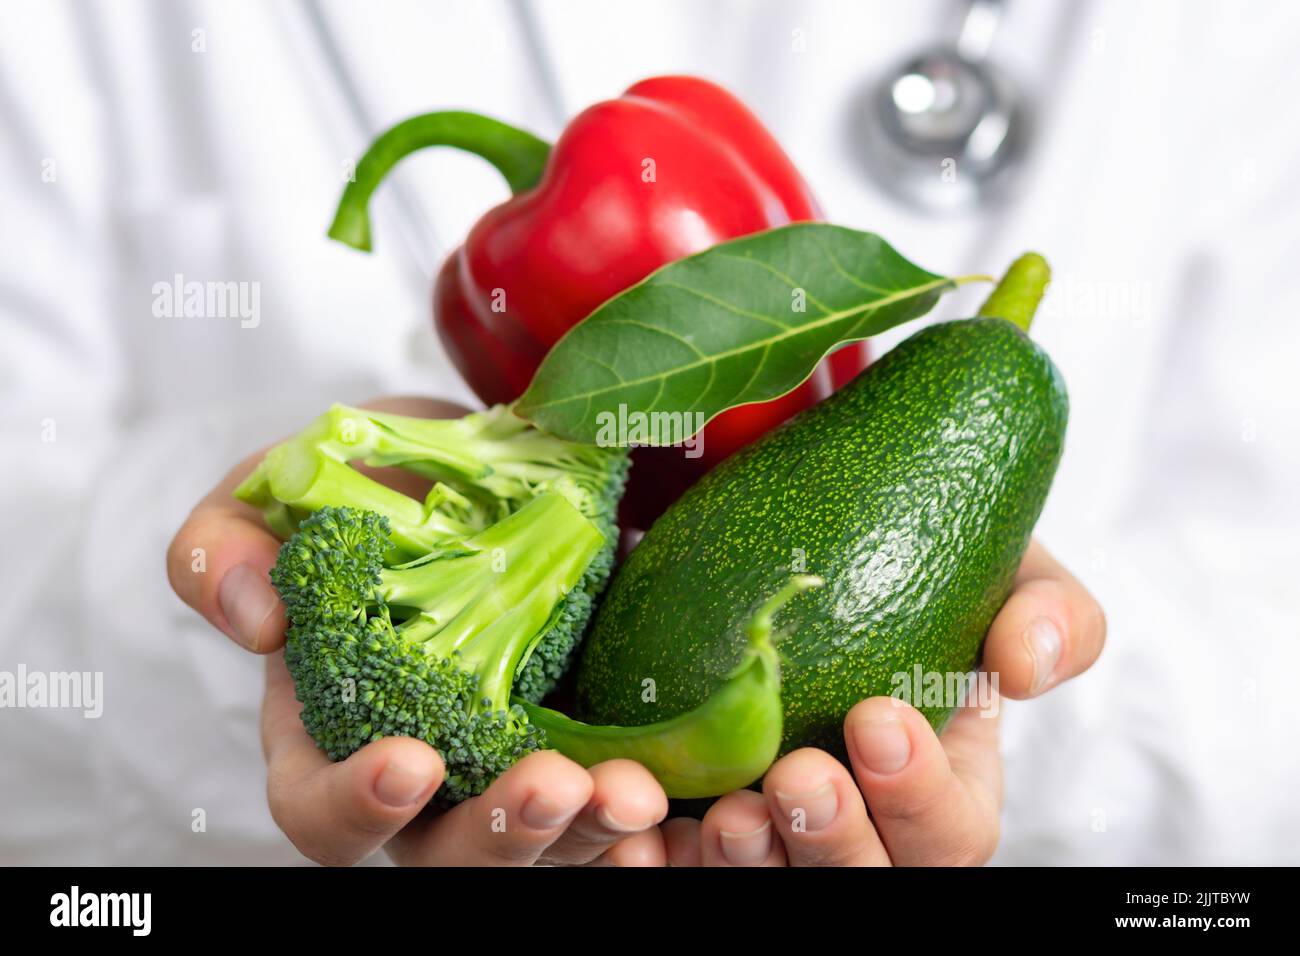 Healthy food Nutritionist doctor holds fresh broccoli avocado and peppers in his hands Stock Photo